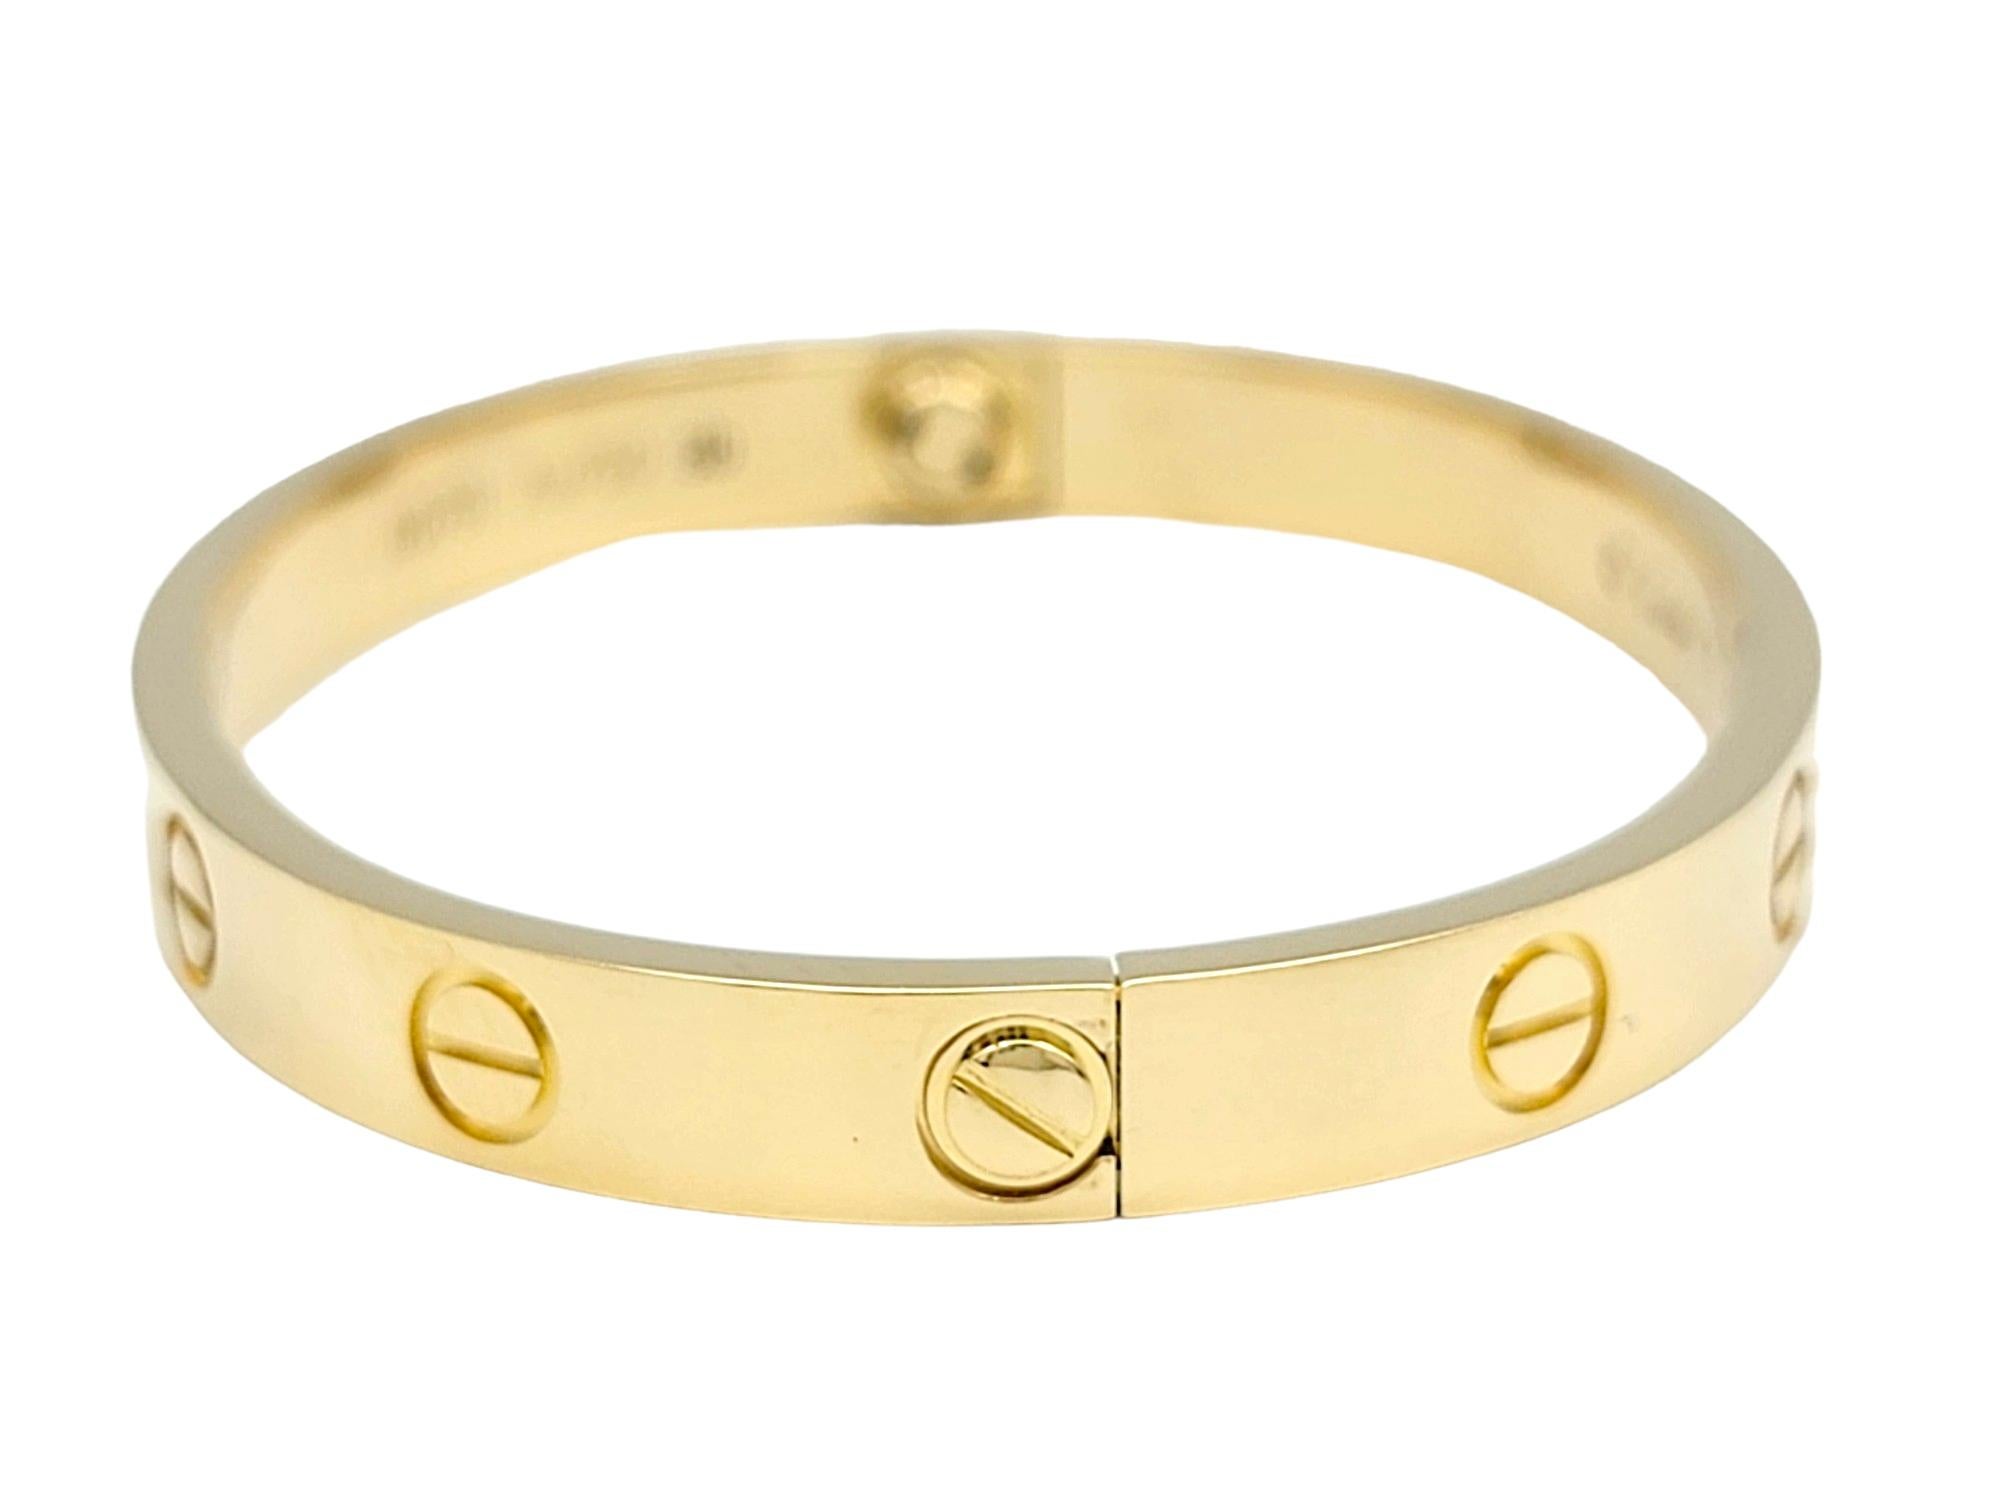 The inner circumference of this bracelet measures 5.5 inches and will comfortably fit a 5 - 5.25 inch wrist. 

This timeless and elegant Cartier Love bangle bracelet, crafted in exquisite 18 karat yellow gold is crafted to impress. Renowned for its